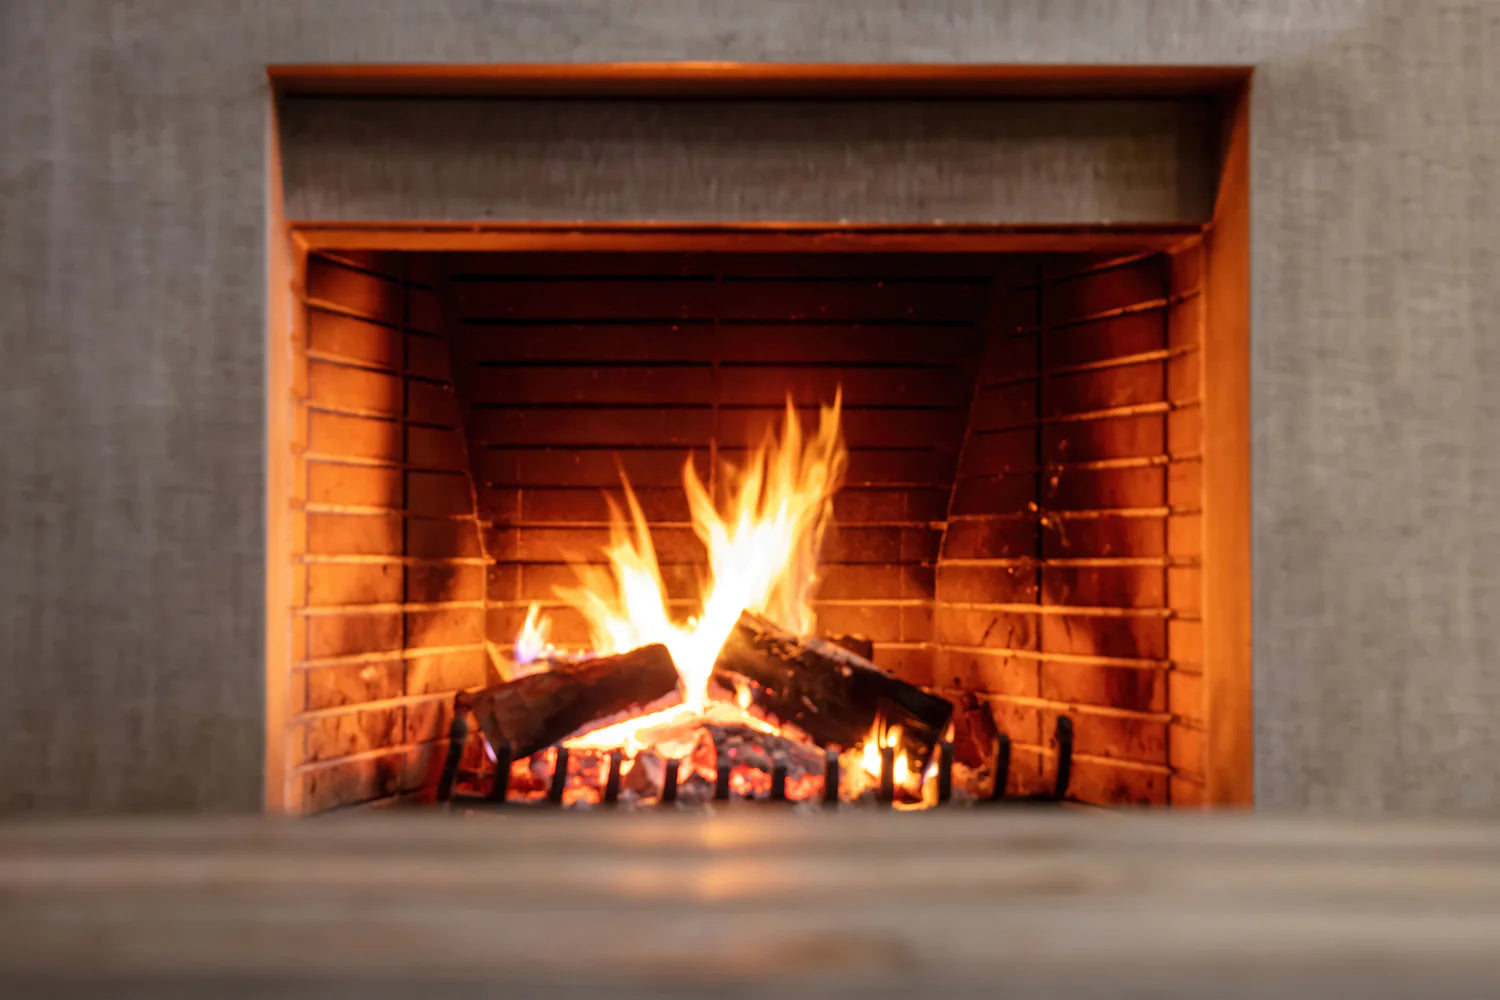 What are the new regulations regarding log burners, and will they be banned?